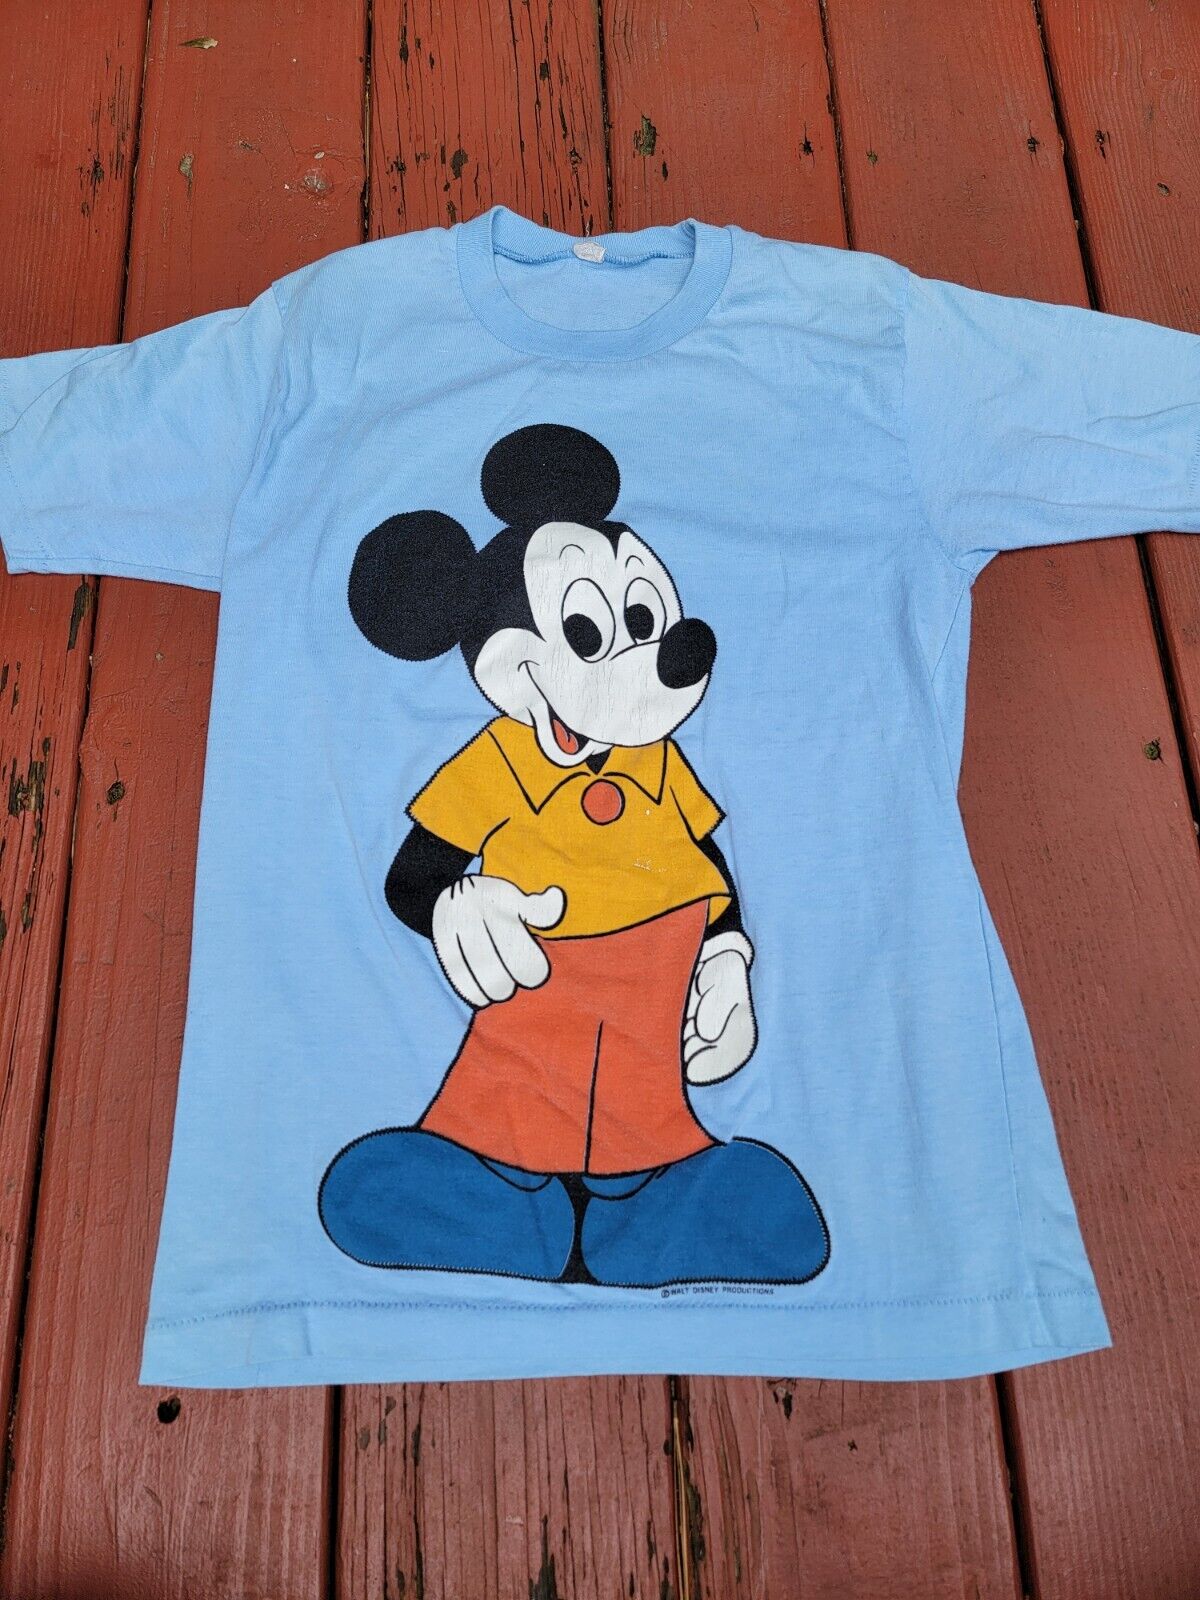 80s Vintage Mickey Mouse Shirt Womens Size Small Short Sleeve Tshirt 